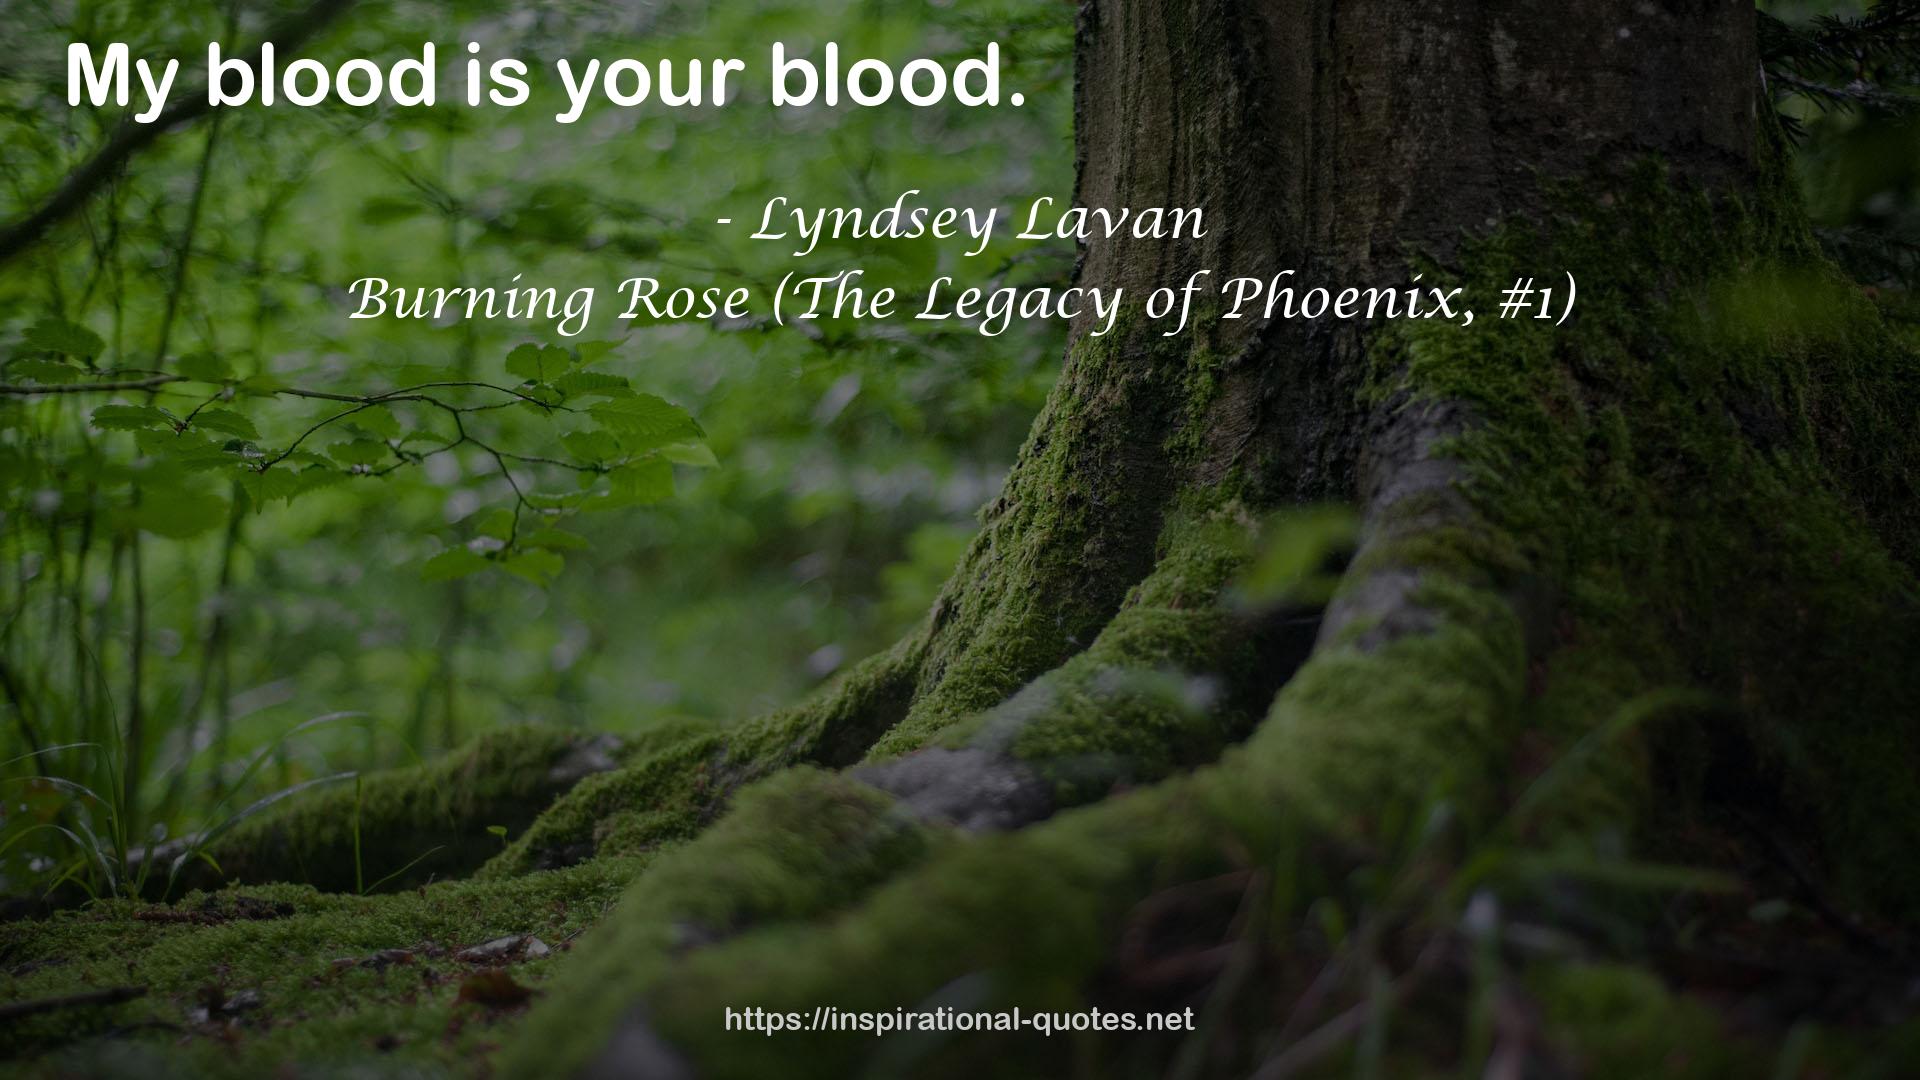 Burning Rose (The Legacy of Phoenix, #1) QUOTES